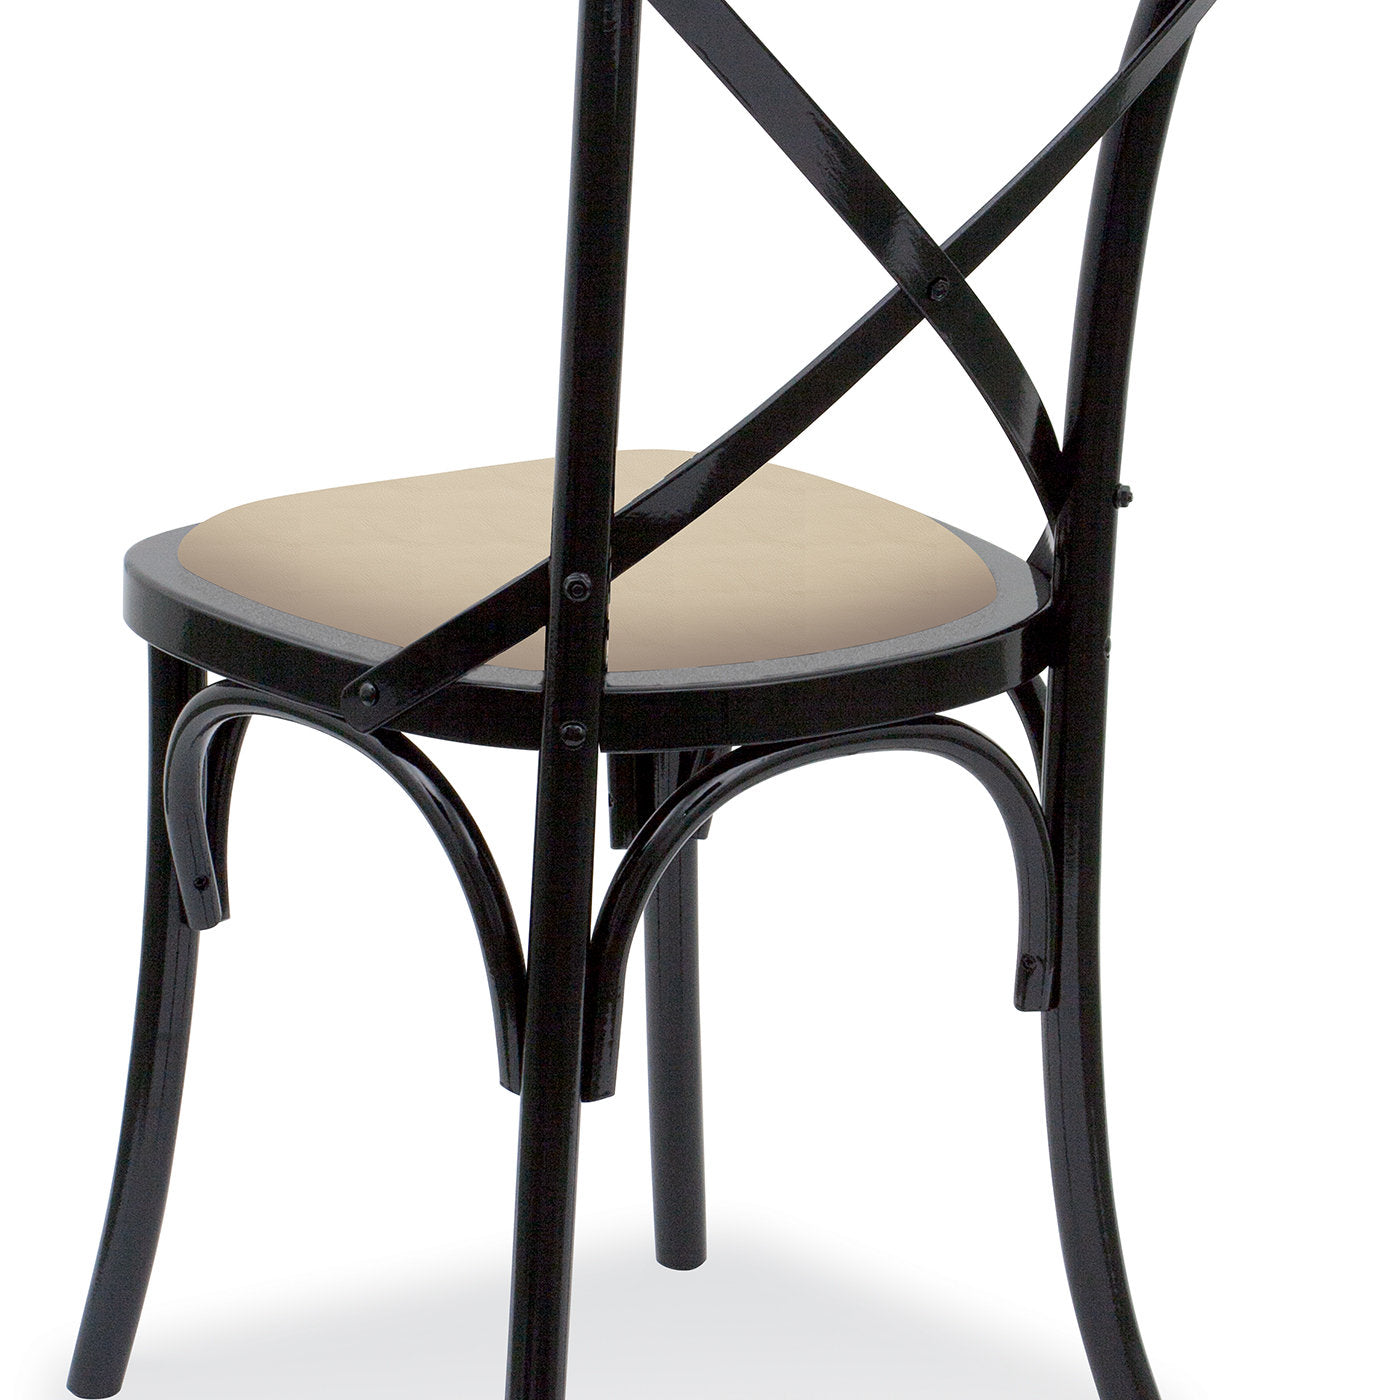 Ciao Swar Set of 2 Black Chairs - Alternative view 1